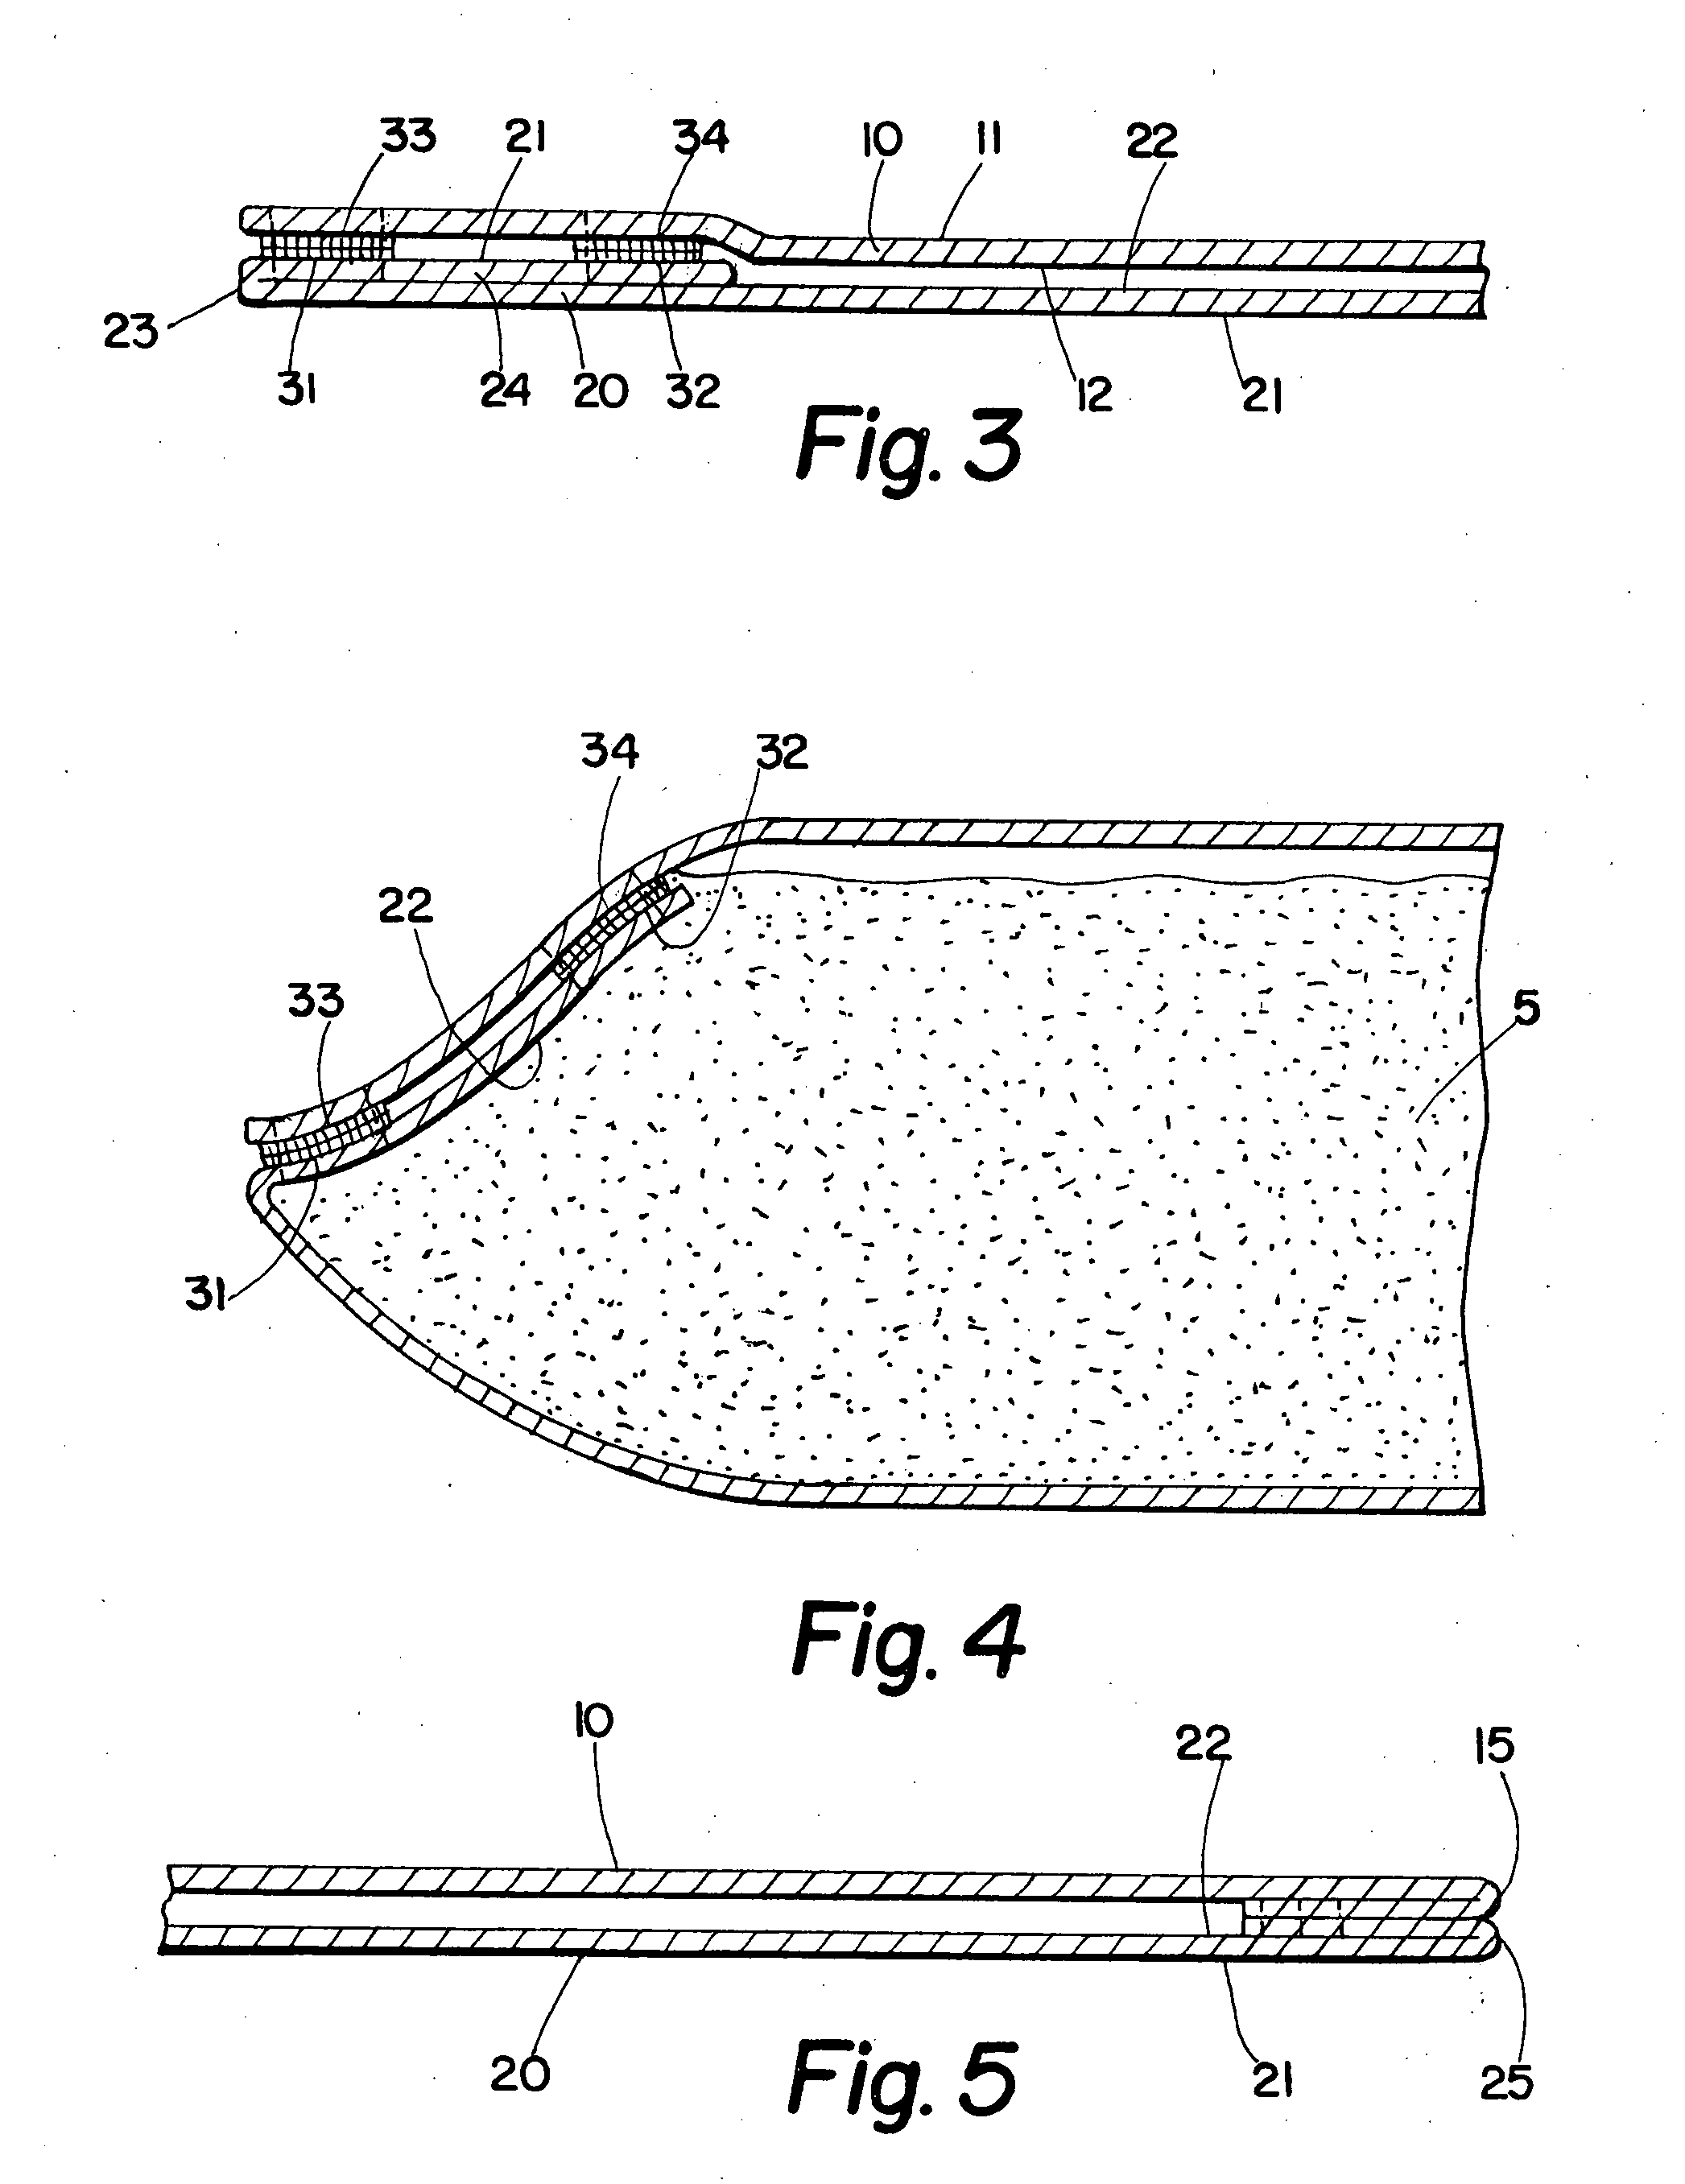 Gravel bag and method for protecting and exit point for stormwater